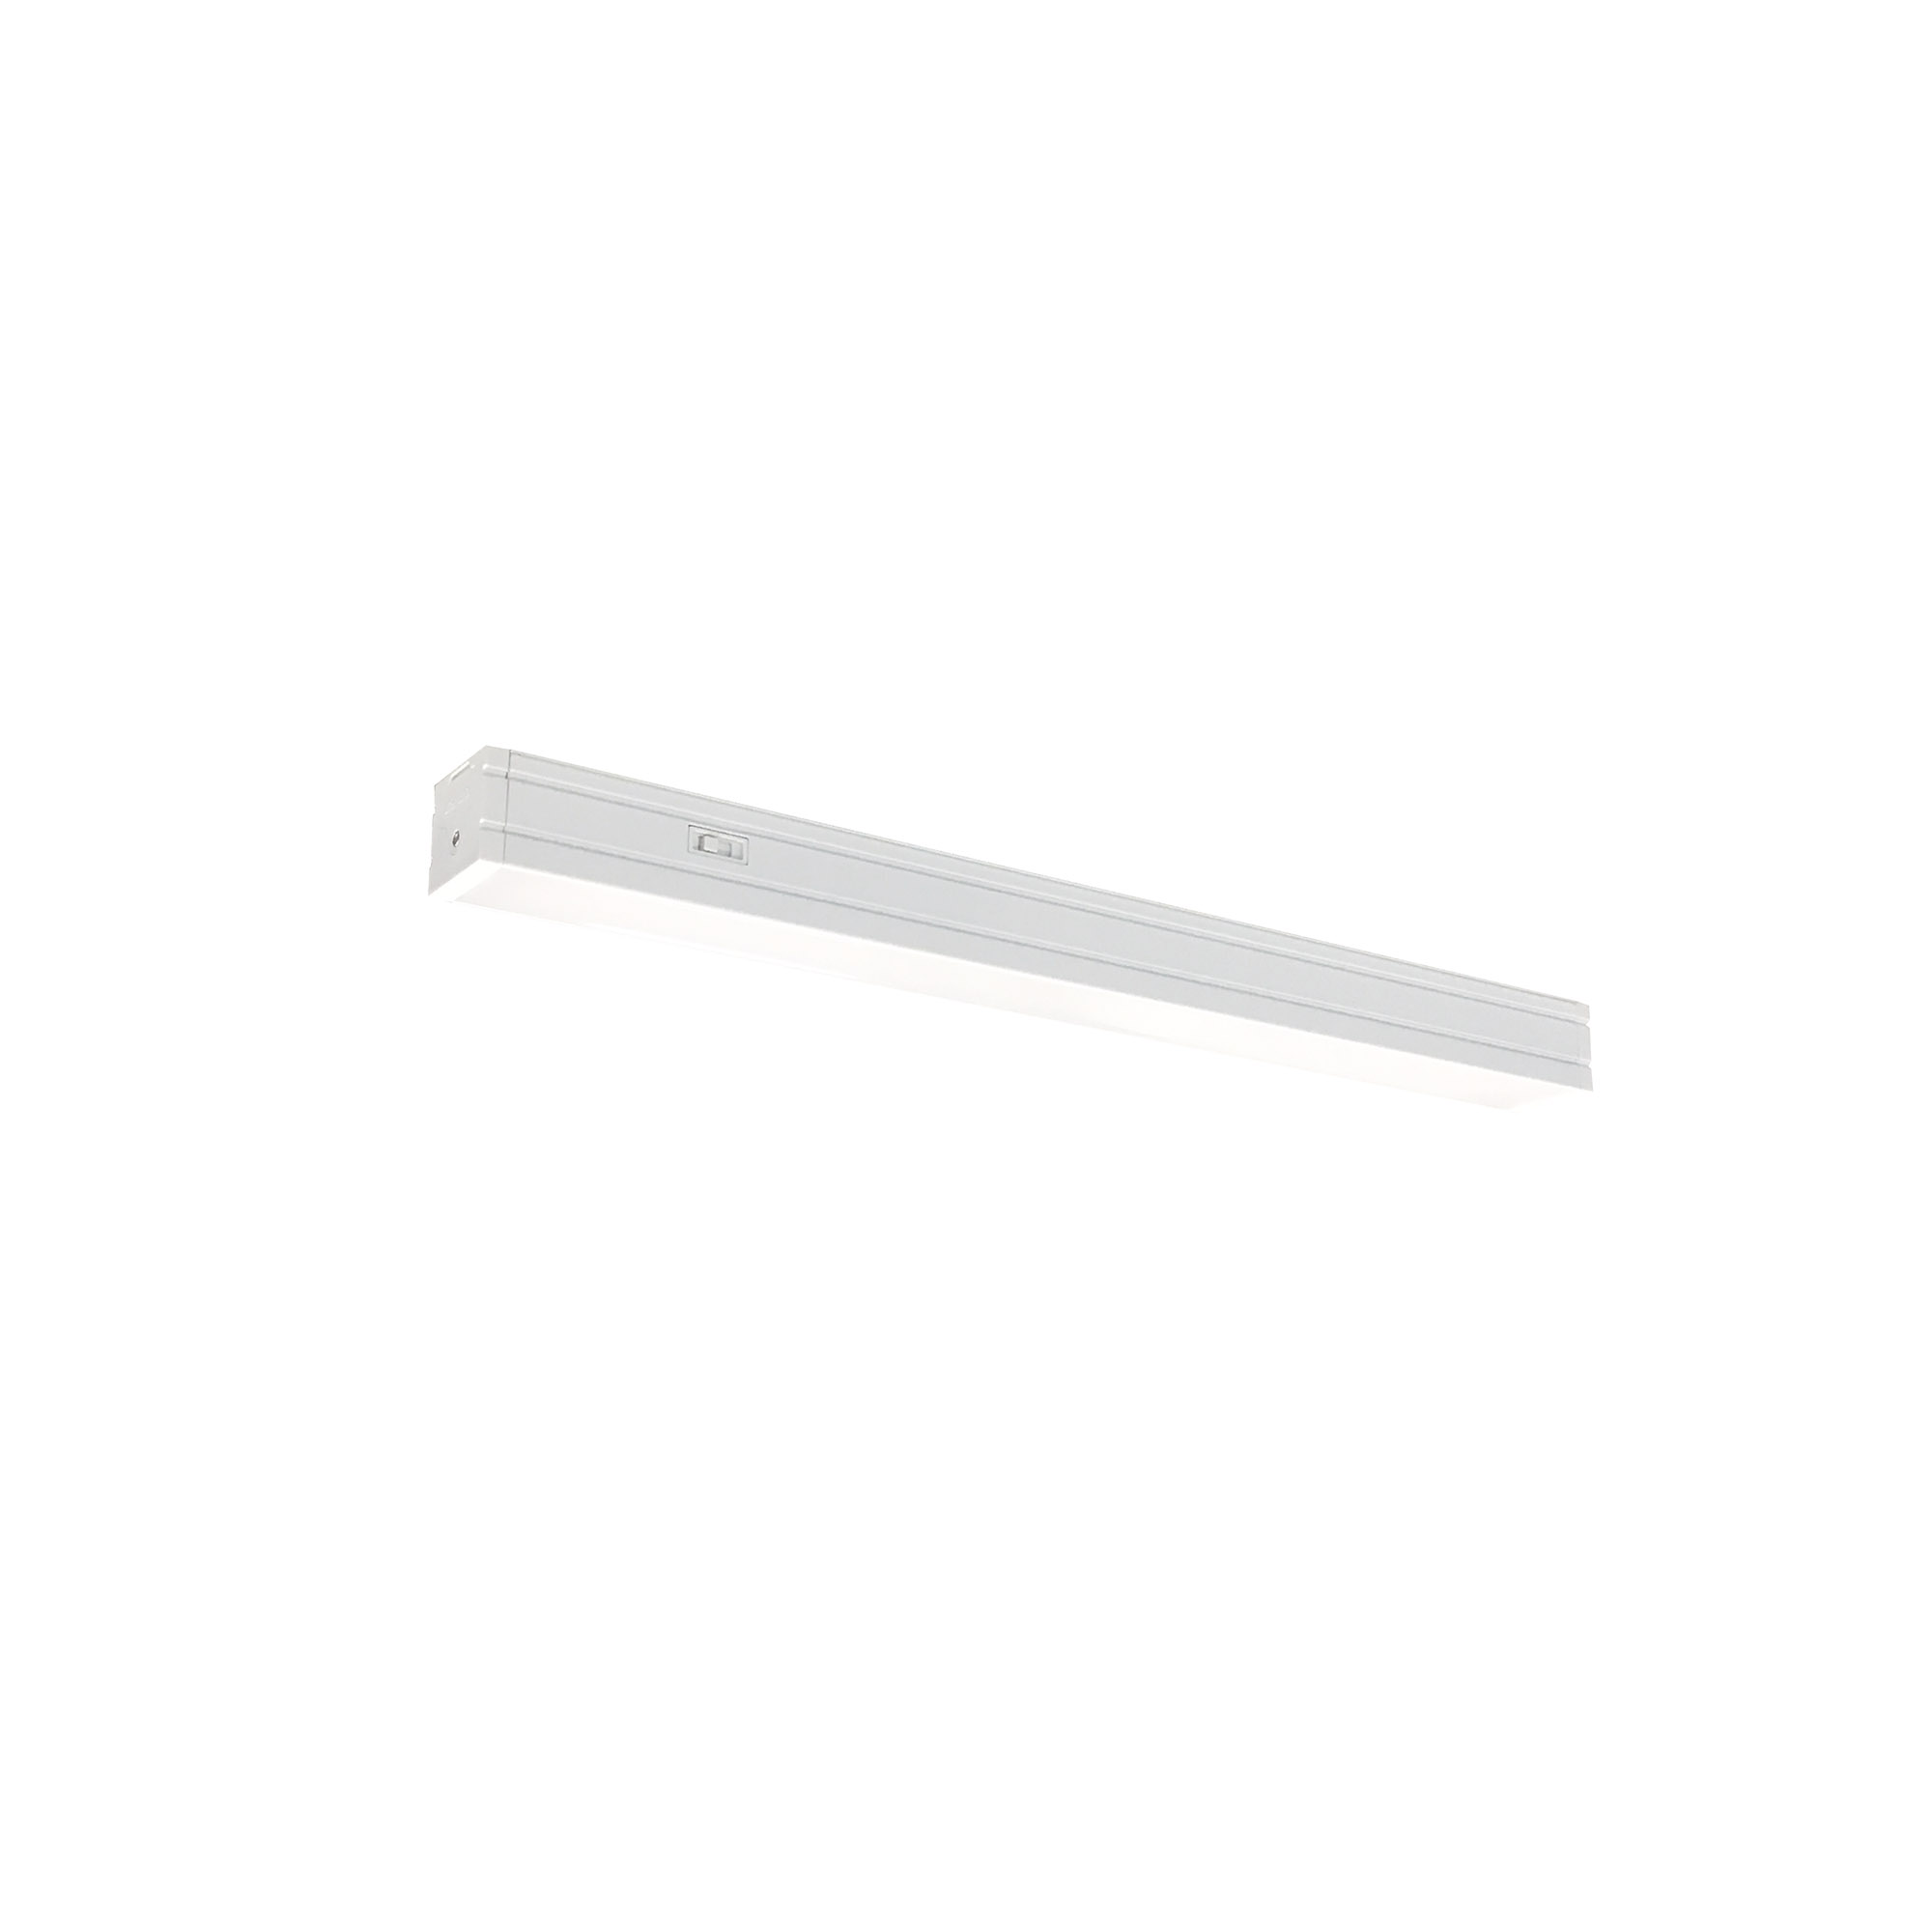 NUDTW-9832
26W CCT Sel 120V Dim White 32&quot; 
LED Linear Frosted Lens